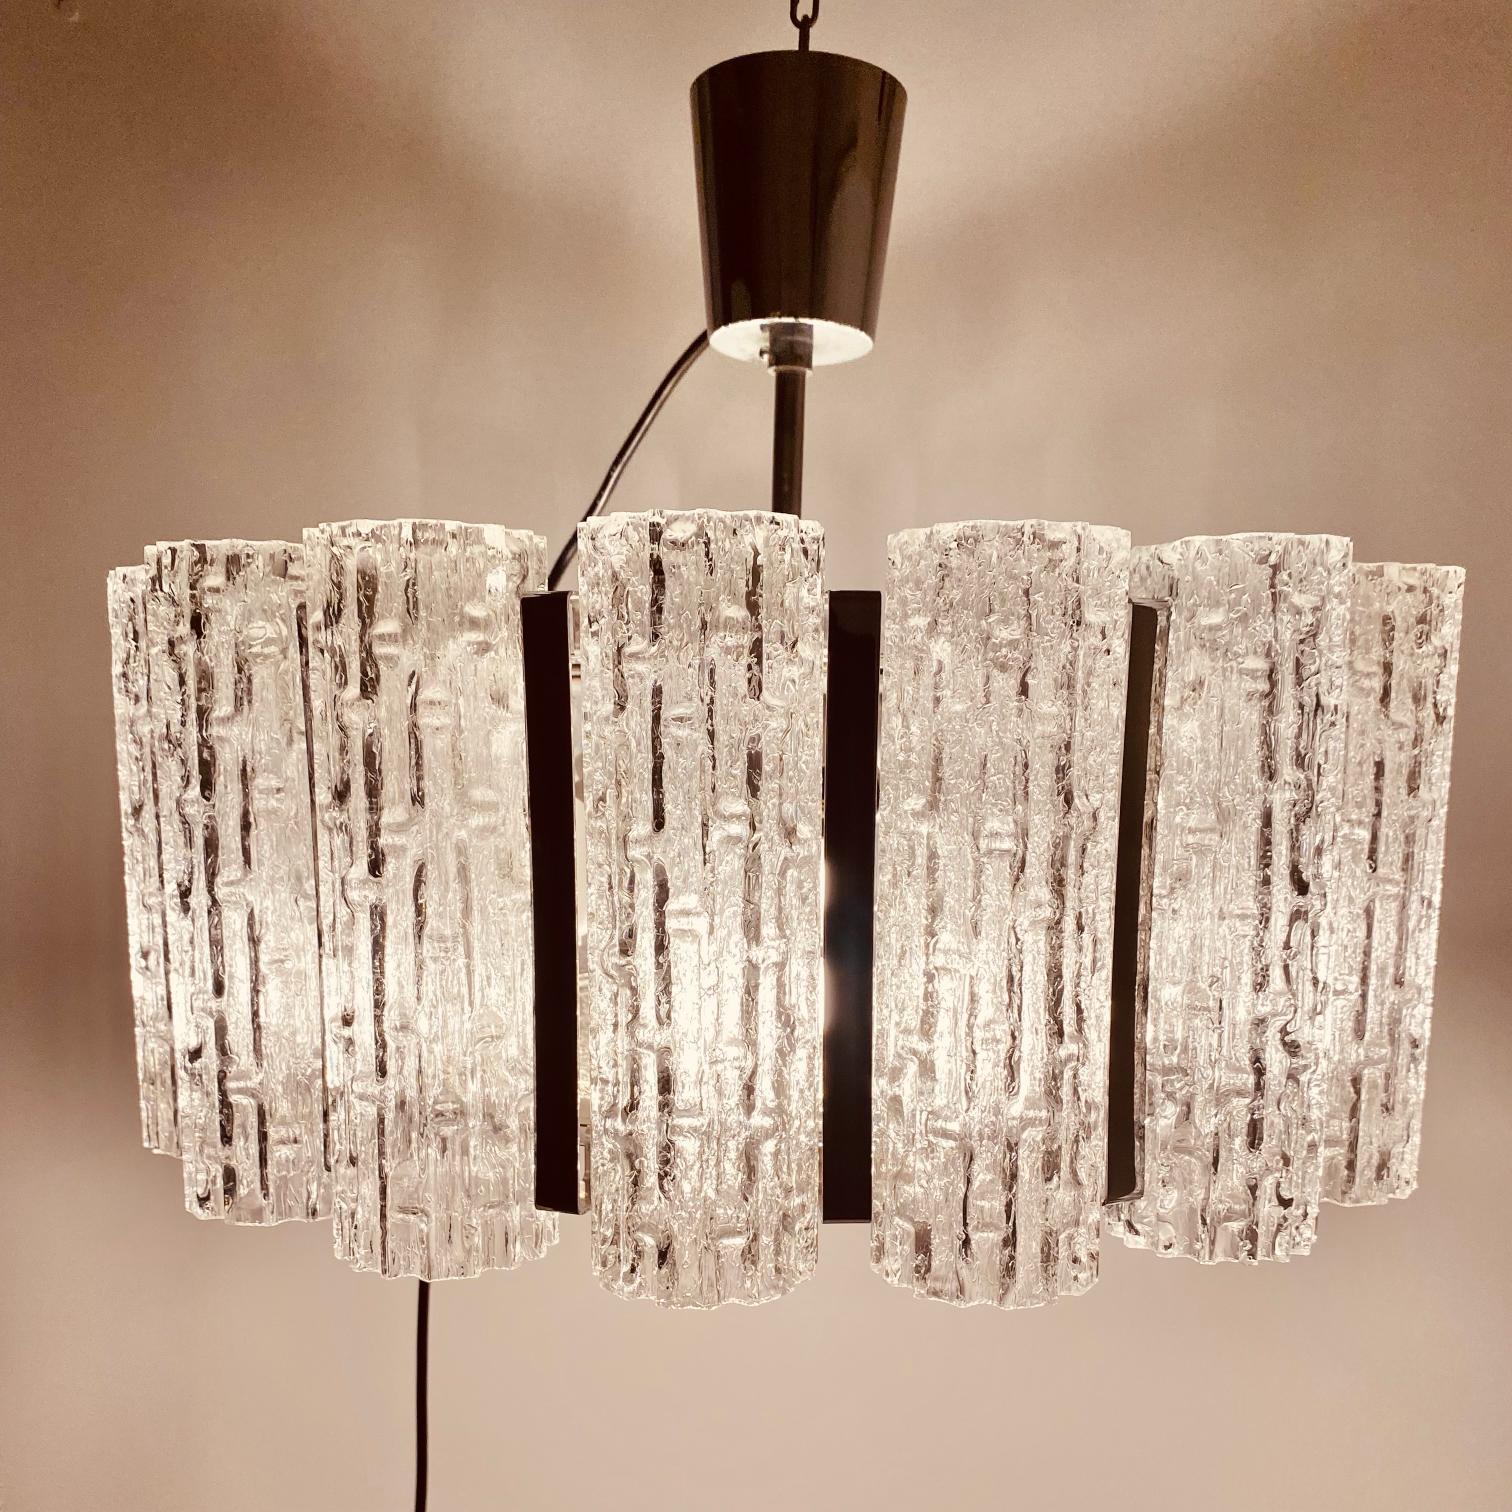 Murano glass chandelier produced in the mid-1960s by Barovier & Toso (Venice).

This beautiful round vintage chandelier consists of 16 finely finished glass tubes and a large sheet of ice glass at the base of the lamp. 

The structure of the